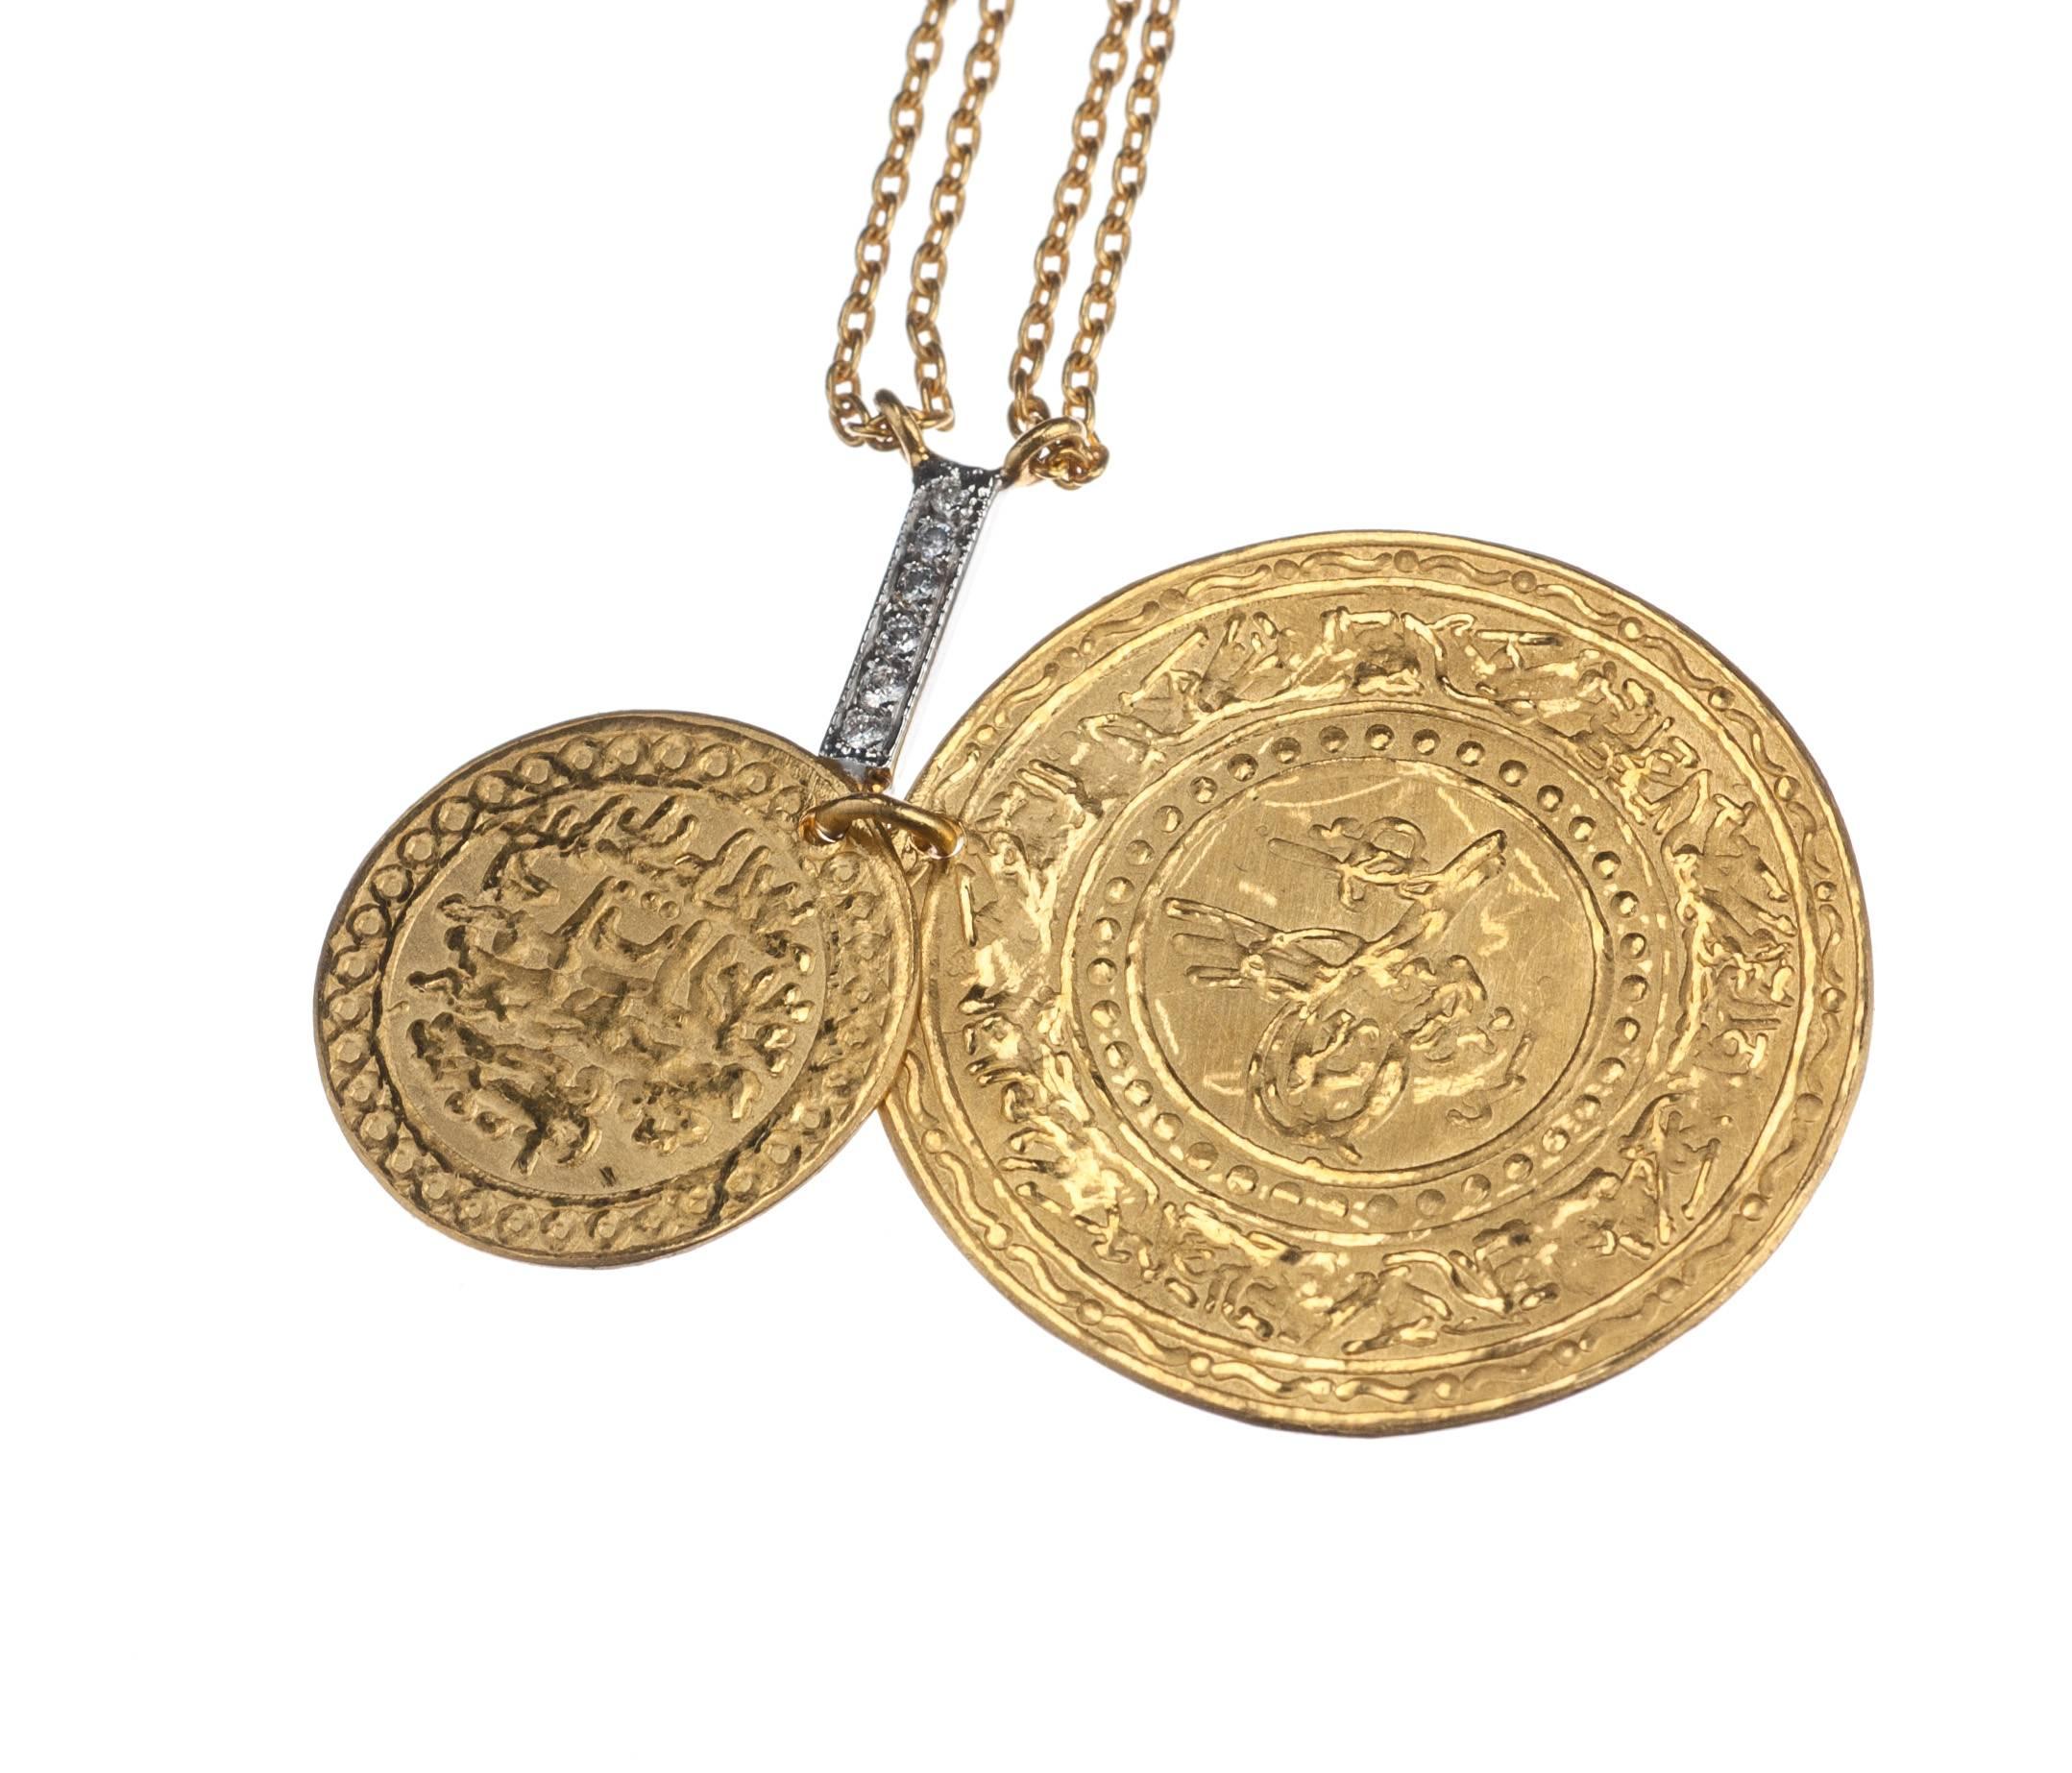 Imbued with the rich warmth of 24-karat yellow gold and the rustic charm of Turkish motifs, a coin necklace from Turkish designer Kurtulan. The two gold coins, one lying against the other, descend from a short length of 18-karat white gold